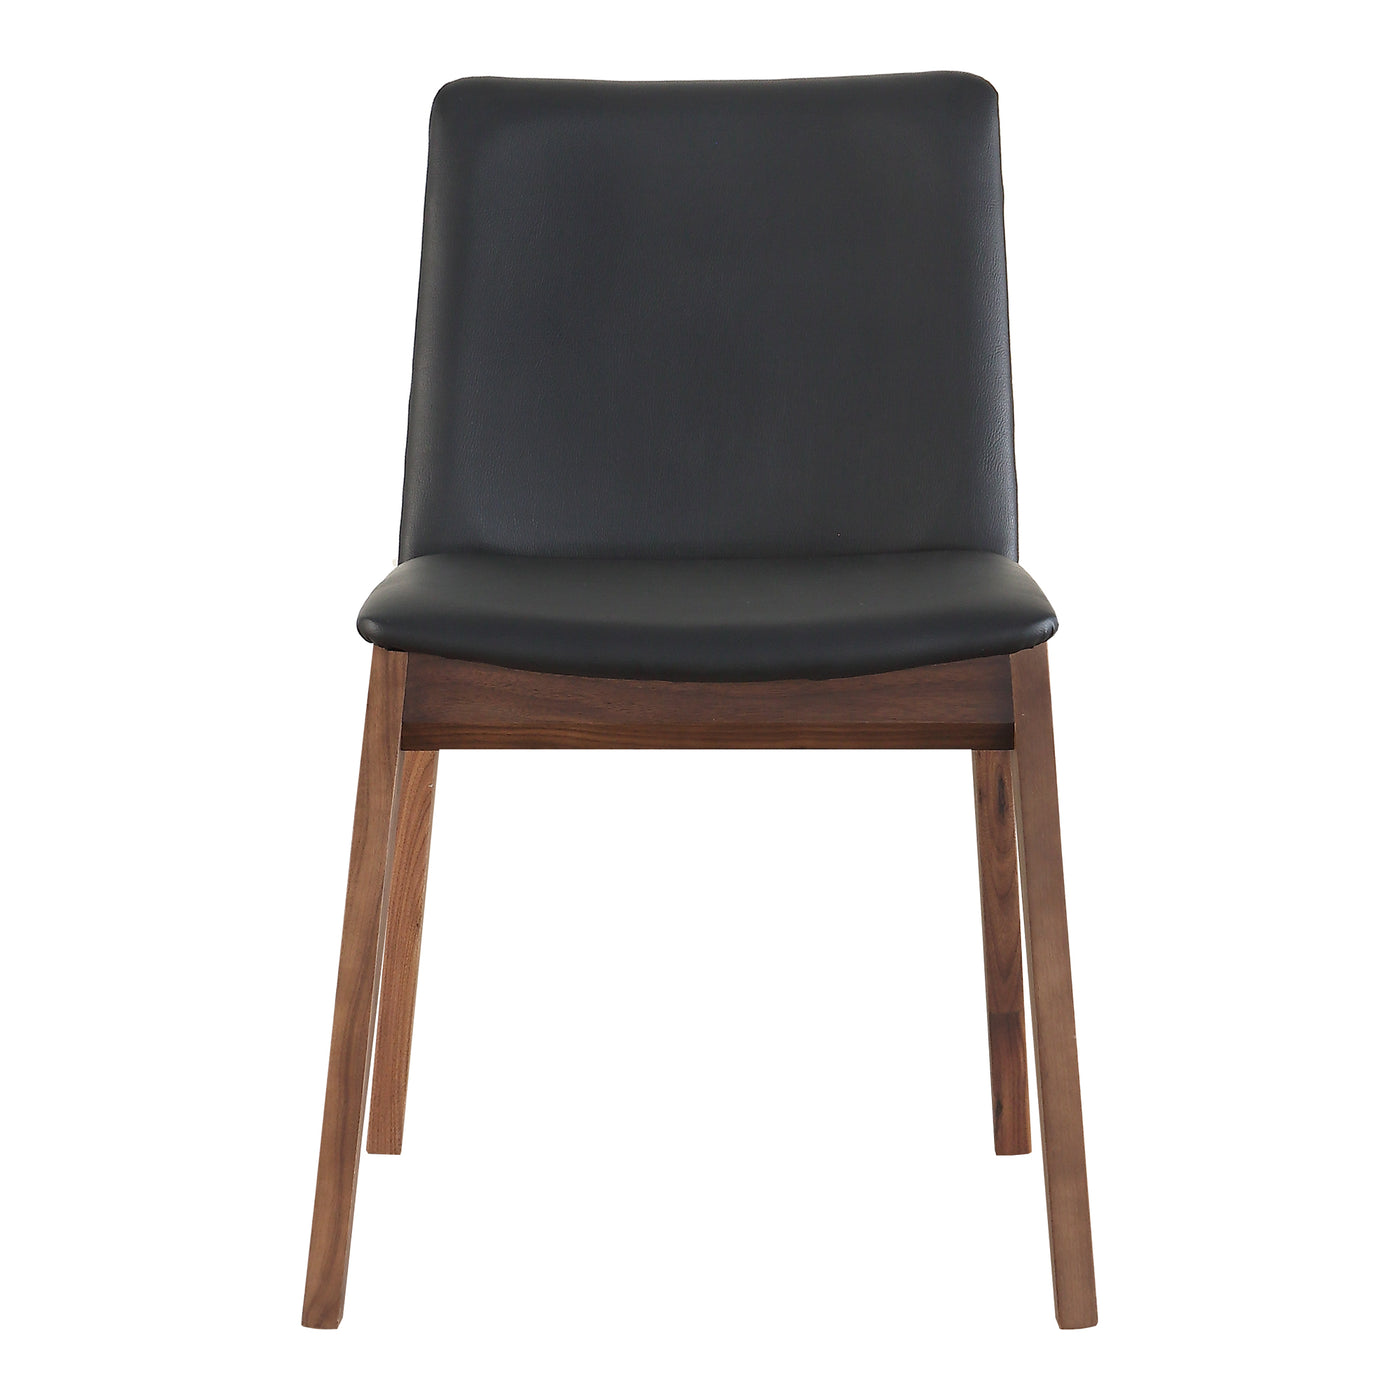 Solid American walnut with a top quality polyester upholstery seat give the Deco dining chair its stylish good looks and m...